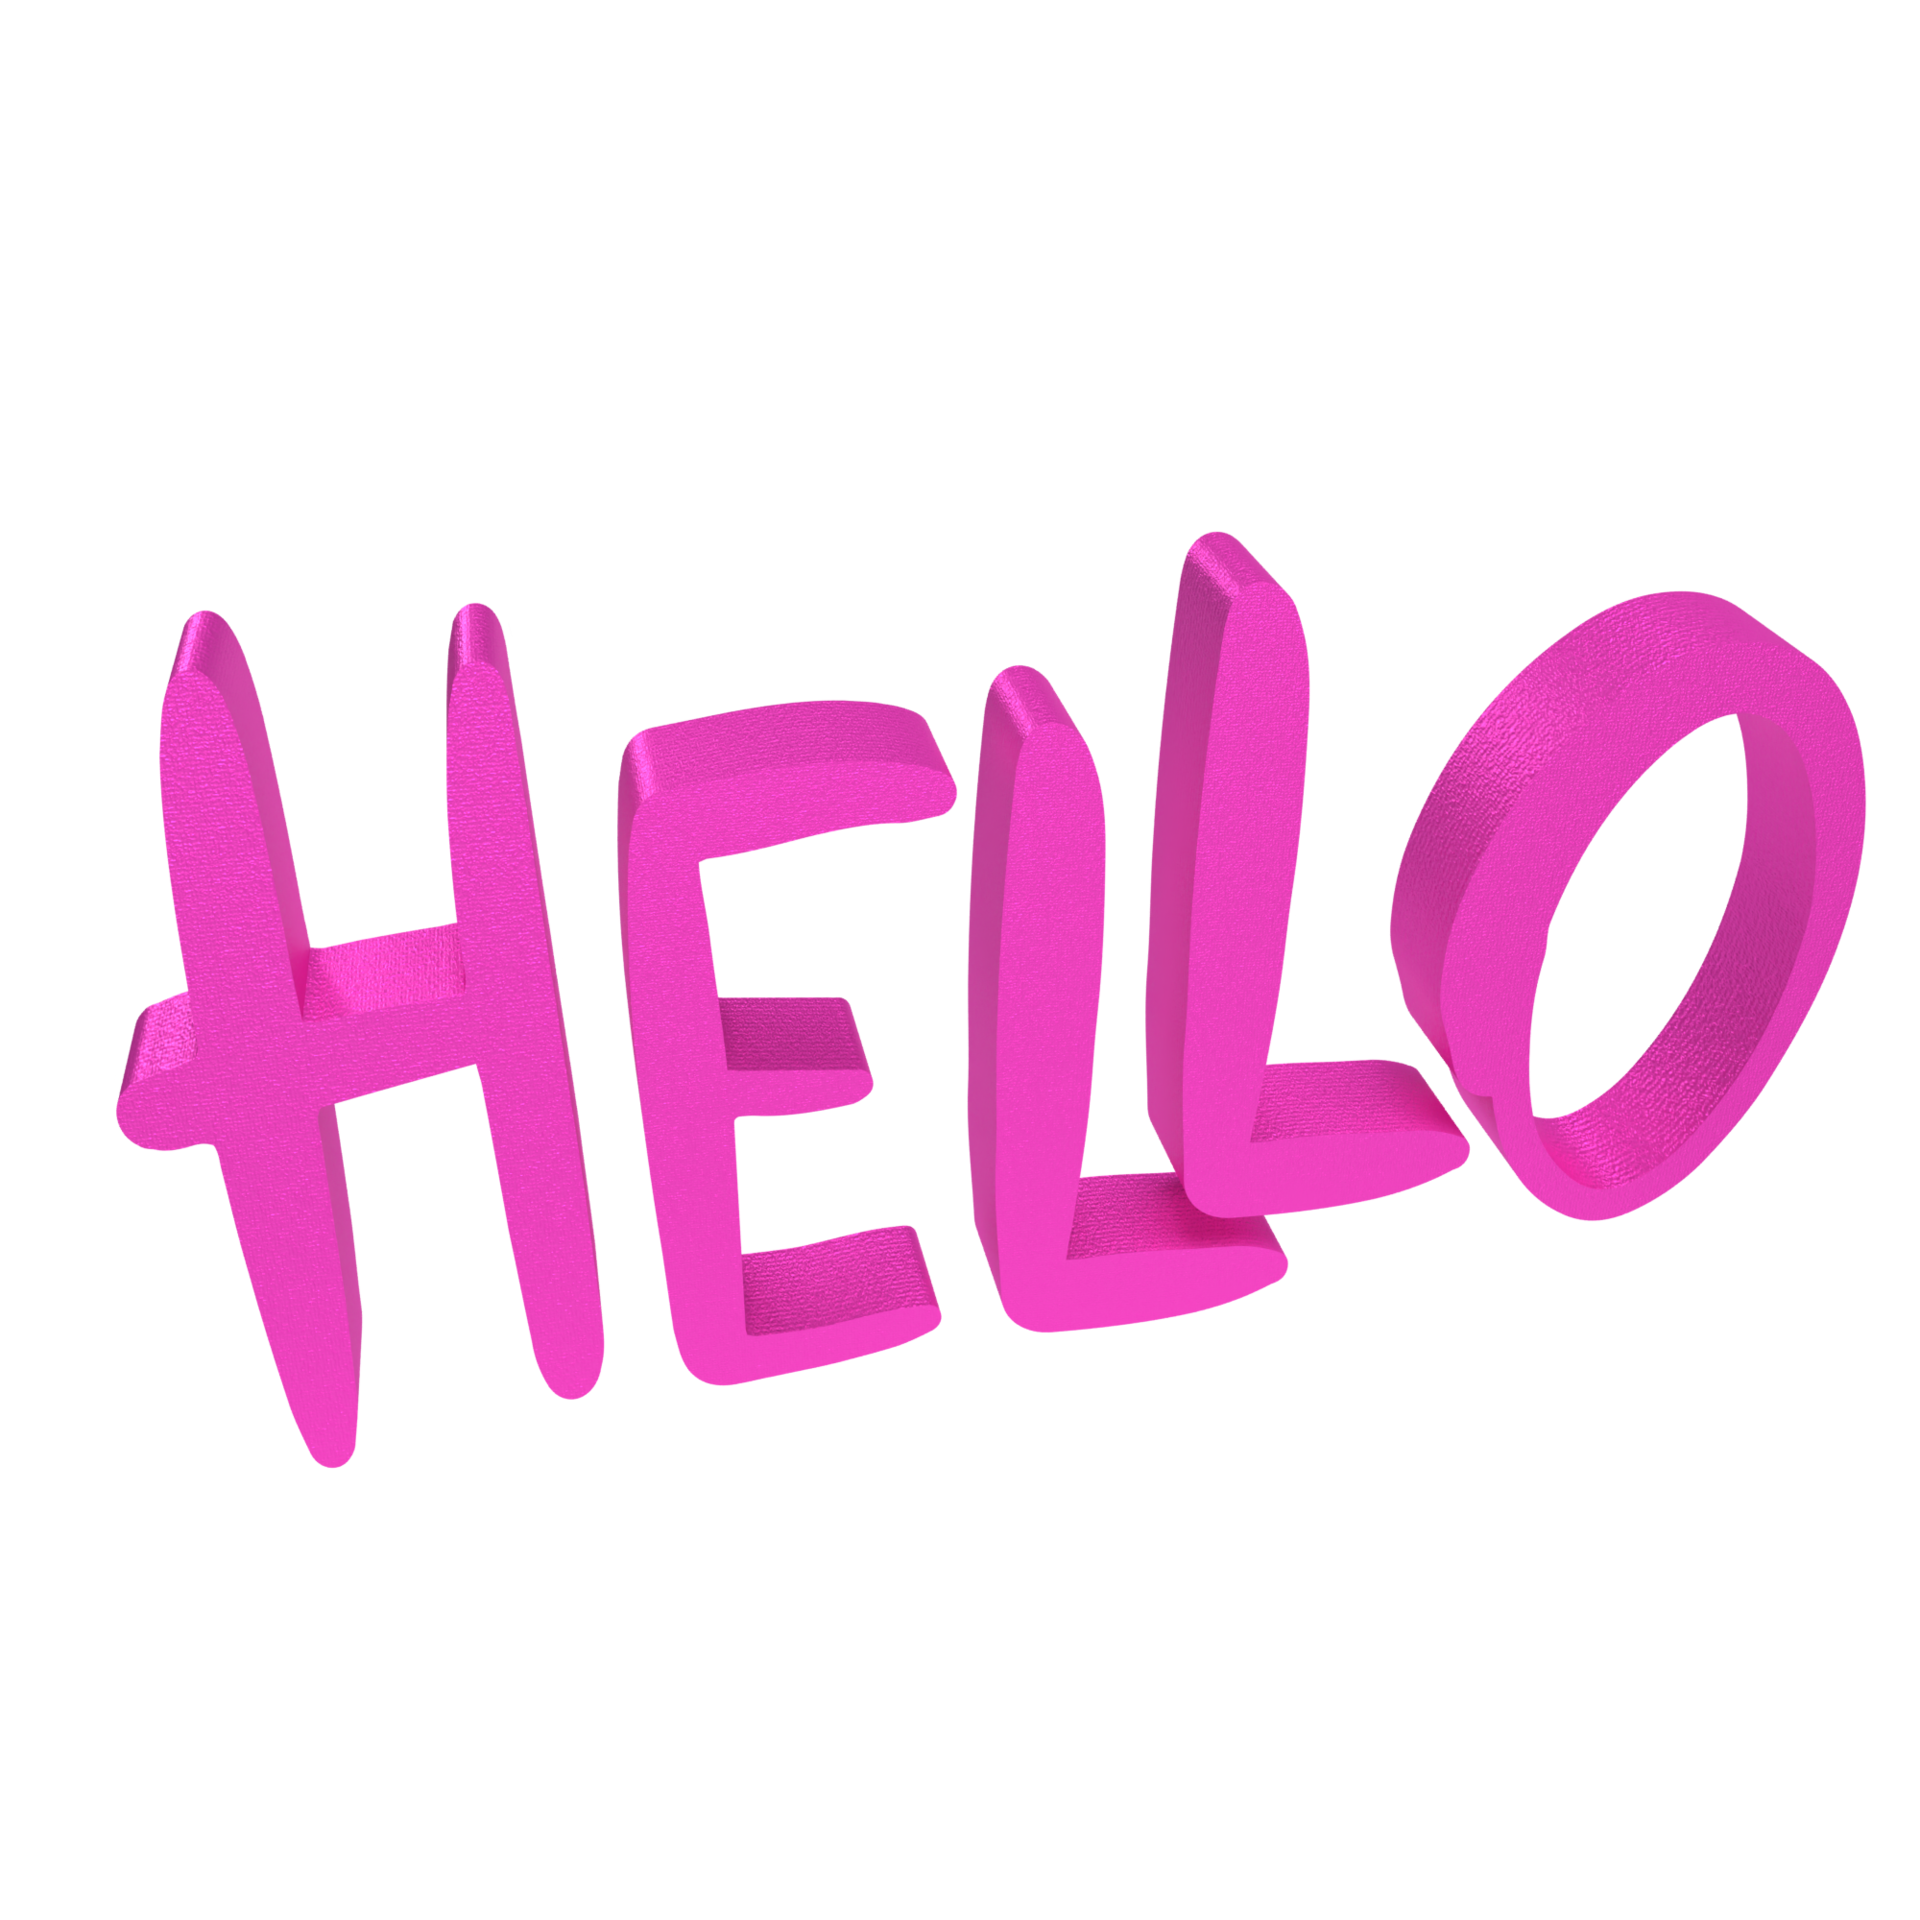 The pink text hello png image 15268921 PNG